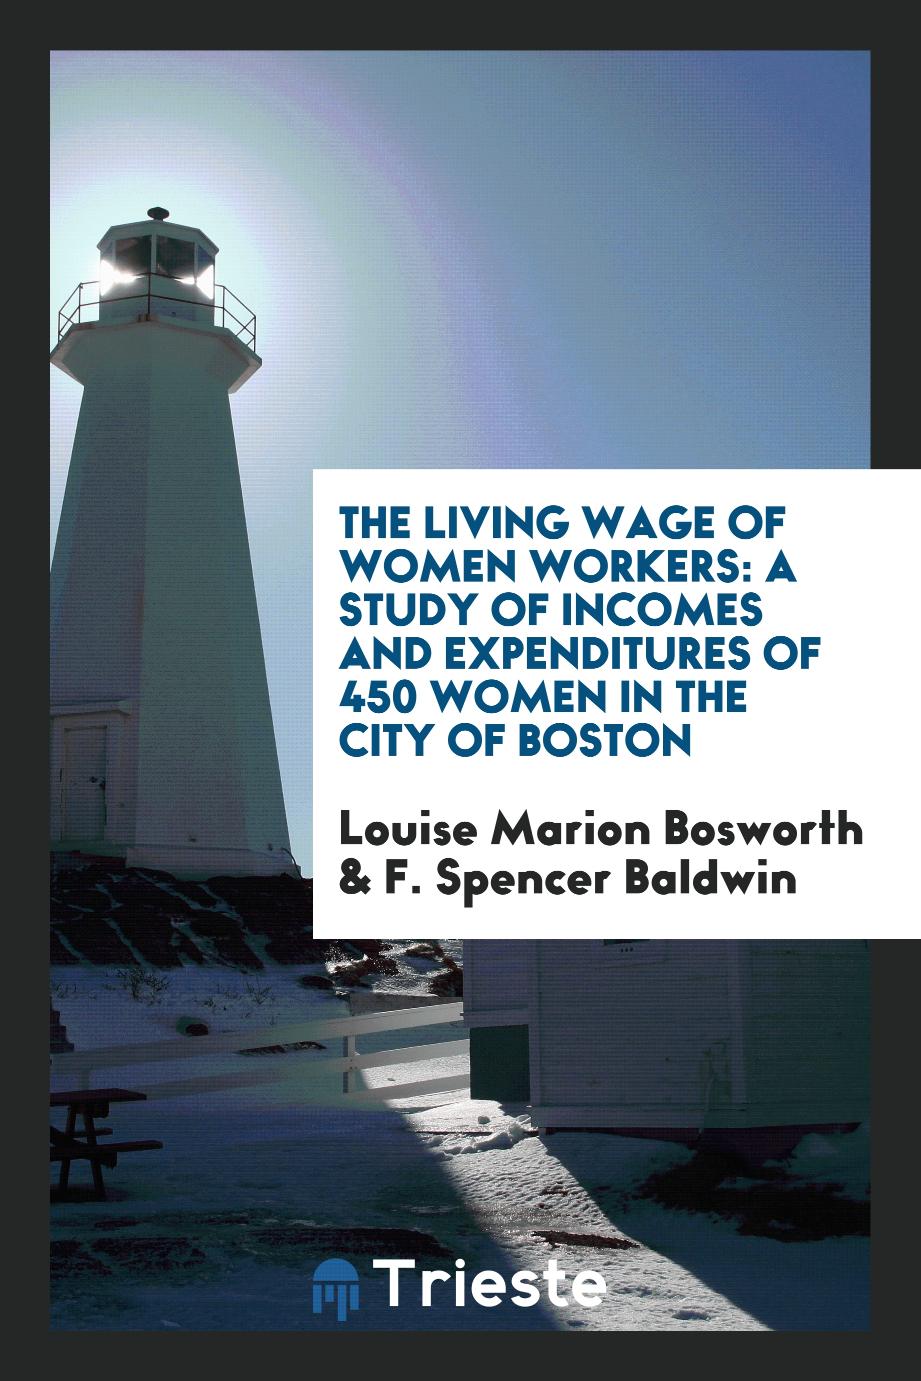 The Living Wage of Women Workers: A Study of Incomes and Expenditures of 450 Women in the City of Boston